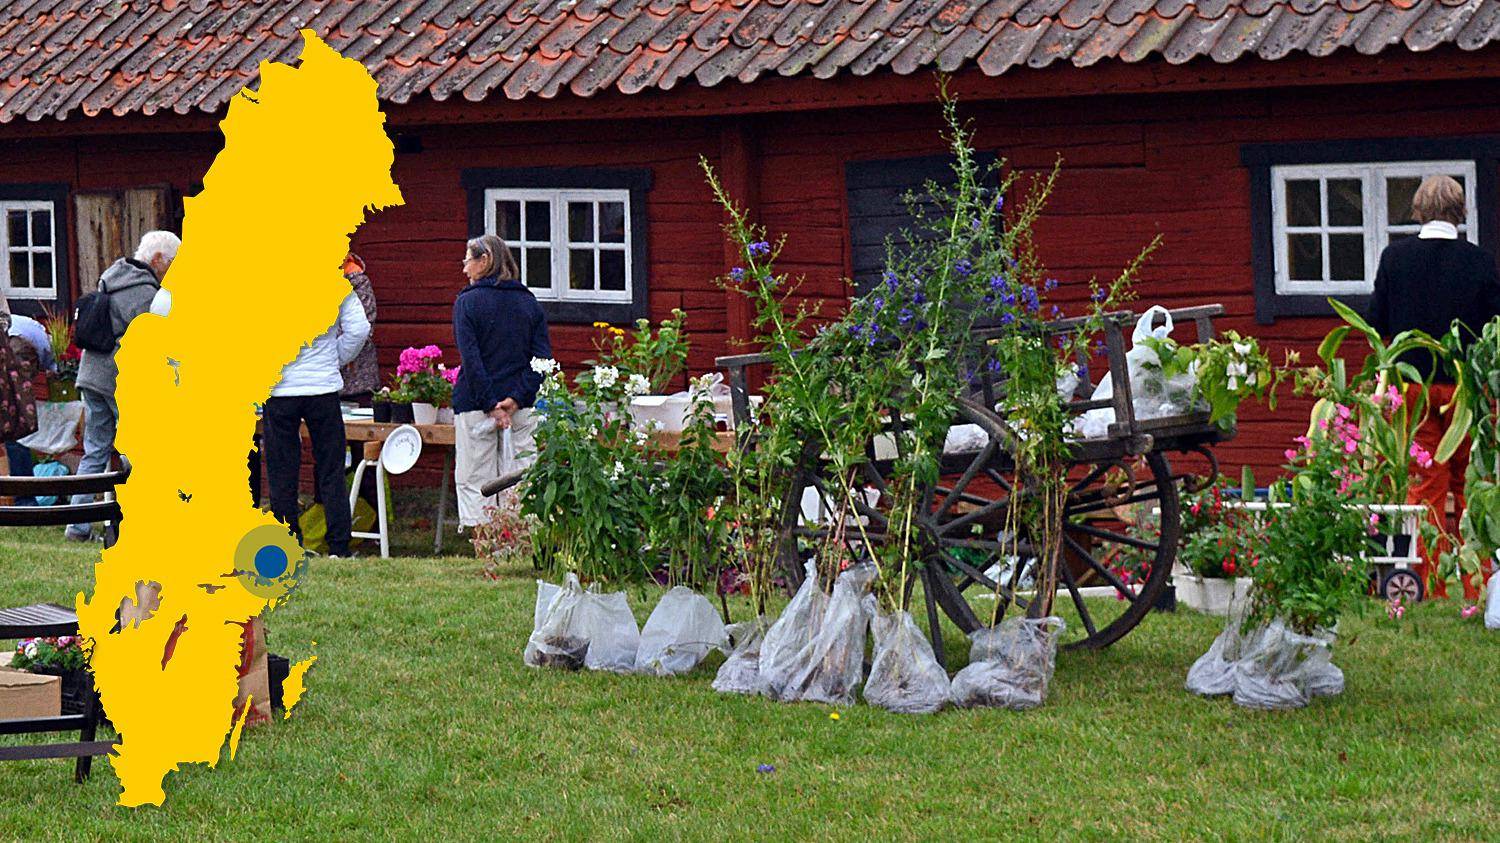 Flowers on a green lawn in front of a red timber house. A yellow map of Sweden with a marker showing the location of Björksta.